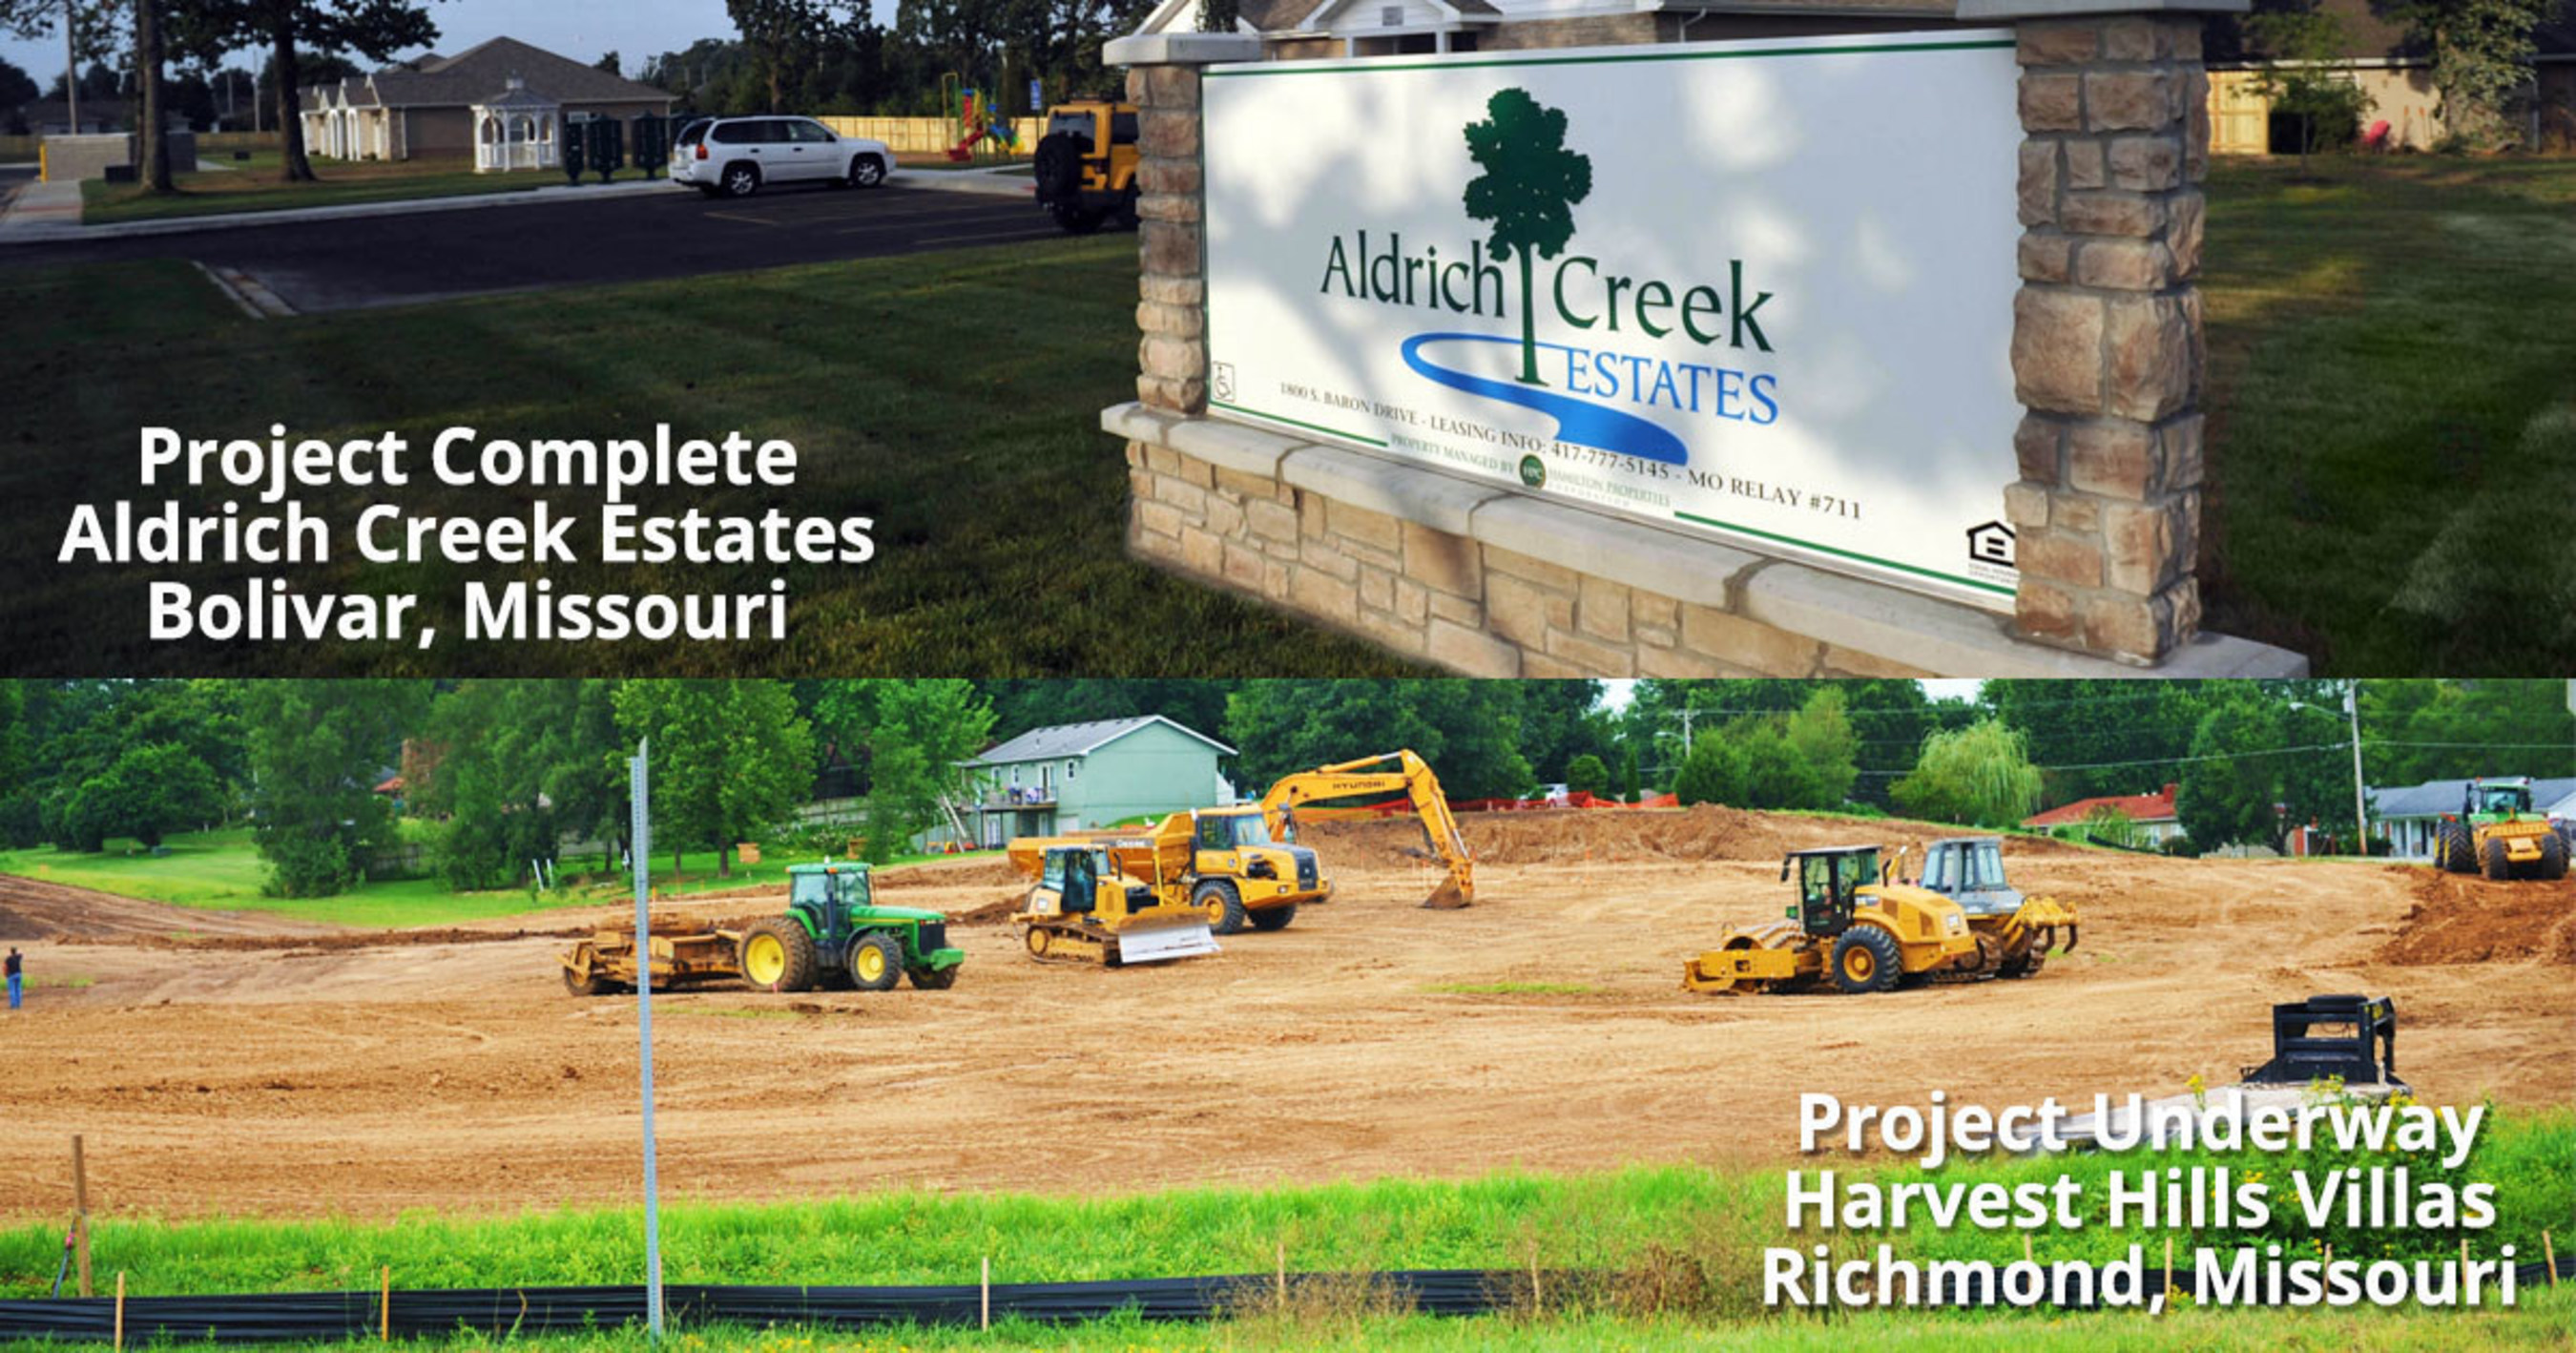 Four Corners Development, LLC has completed construction on our 12 month Aldrich Creek Estates affordable family apartment community in Bolivar, Missouri! We have also just broken ground on Harvest Hills Villas in Richmond, Missouri which is a new affordable senior community.